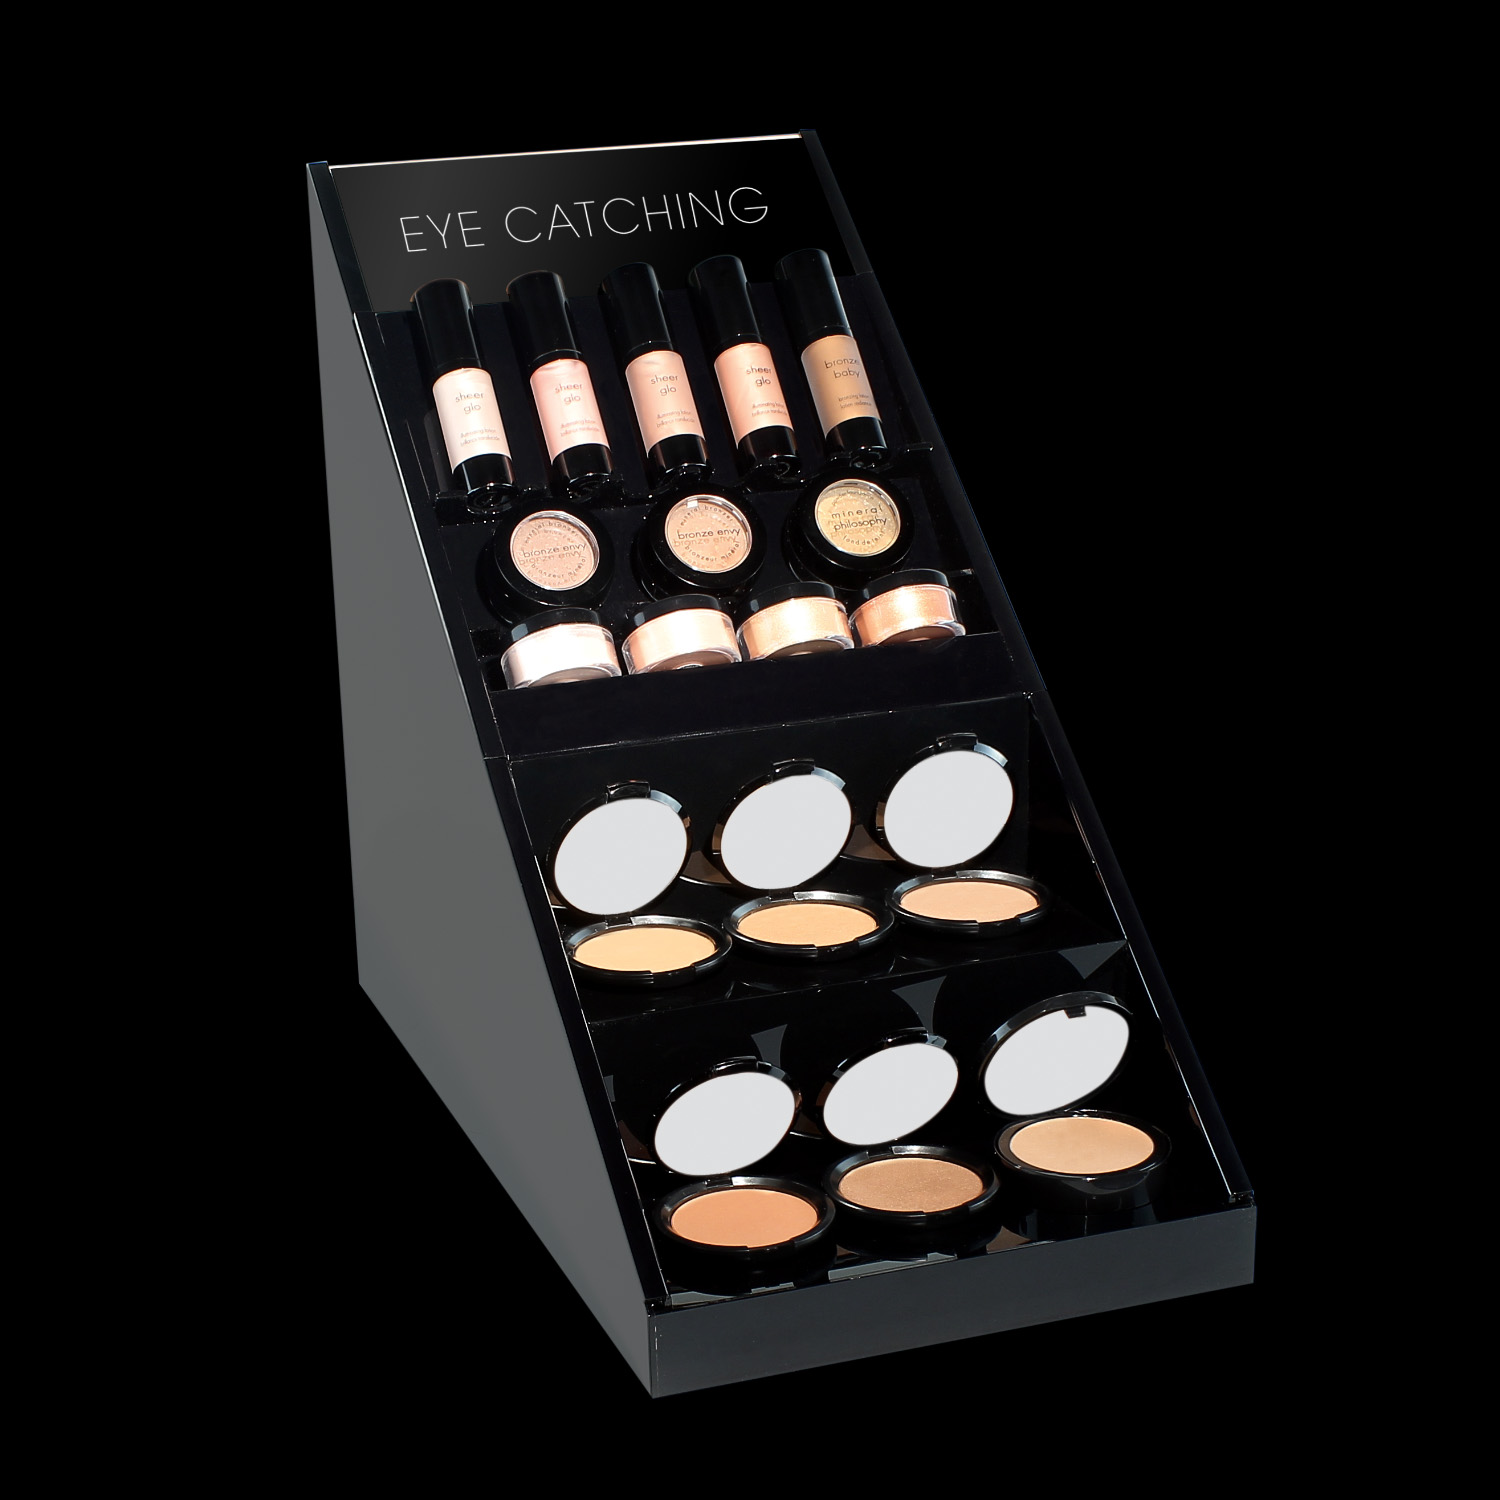 Classic packaging Visionary bronzer displays to create an exquisite retail environment with ease